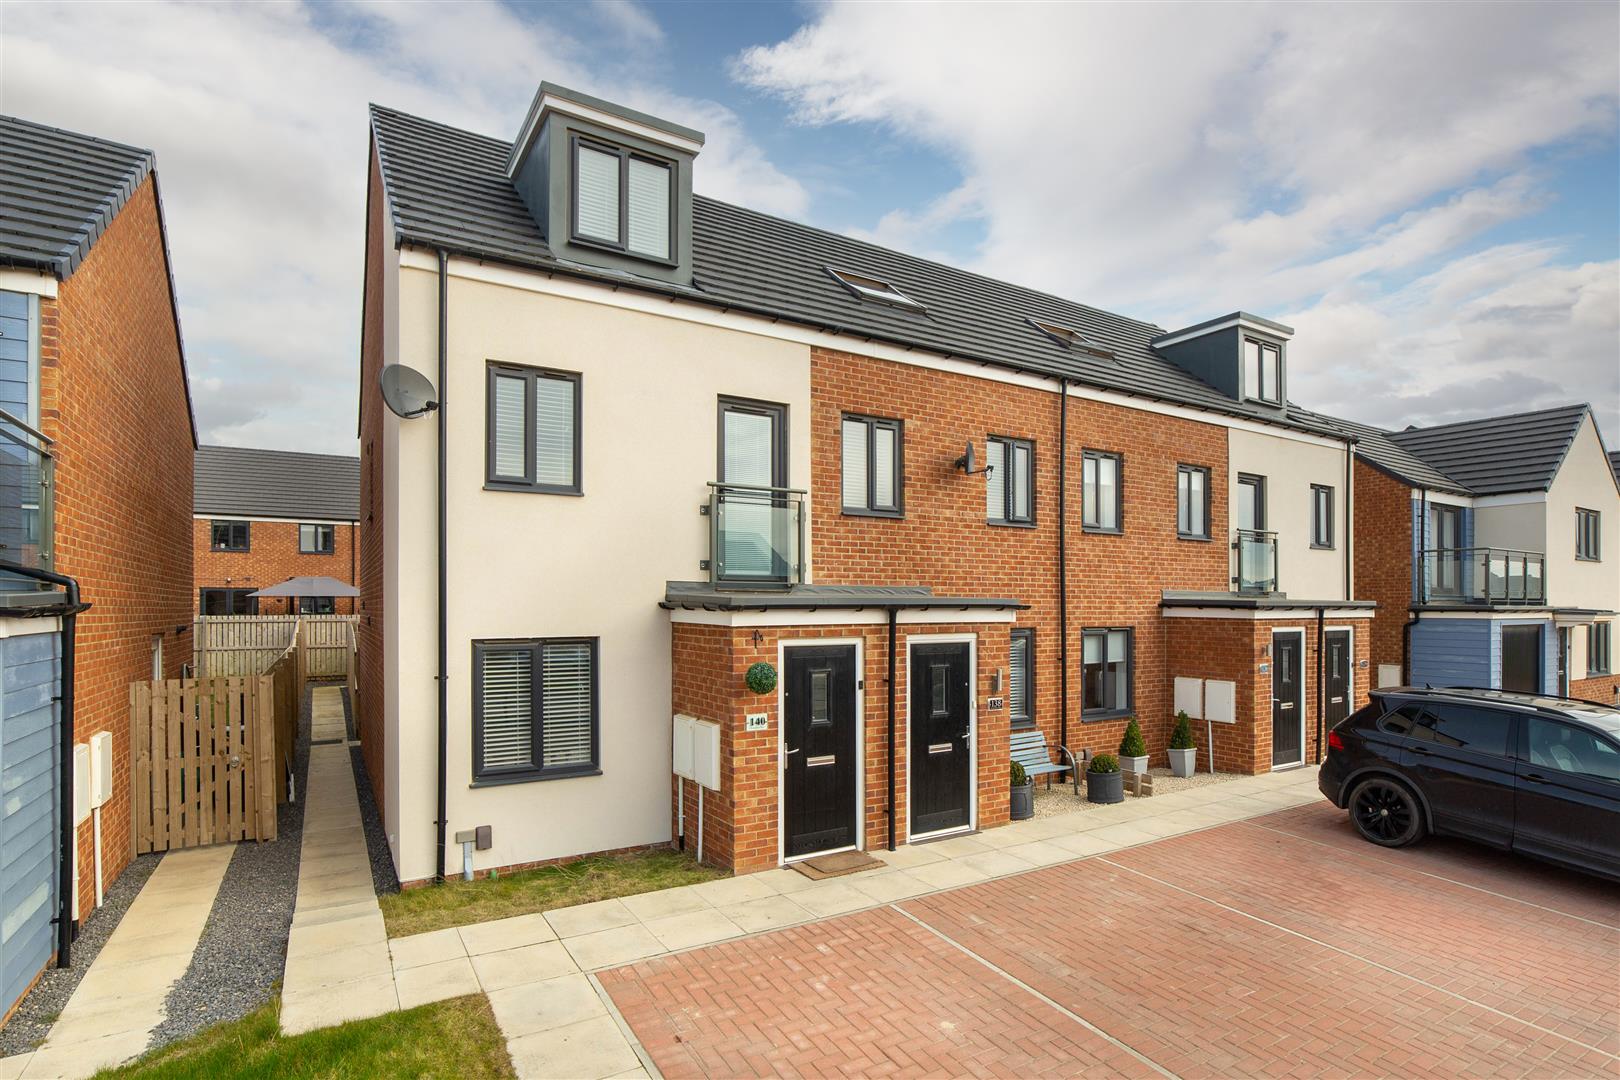 3 bed town house for sale in Roseden Way, Newcastle Upon Tyne, NE13